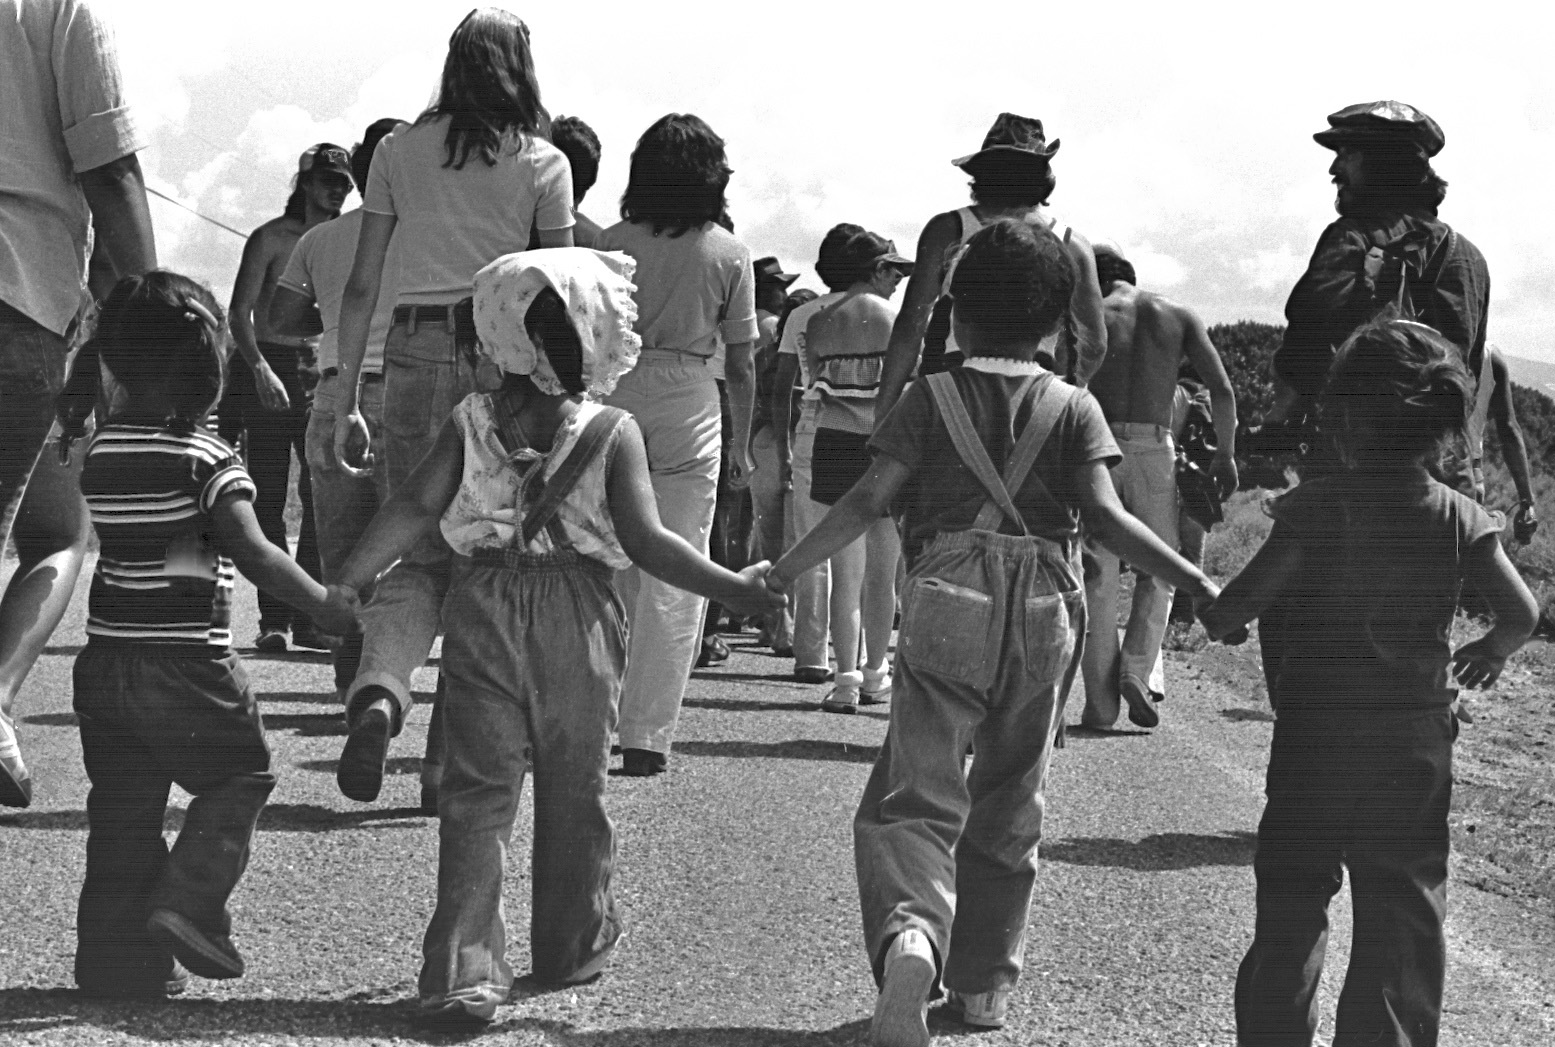 Children of the Chicano Movement march in San Luis